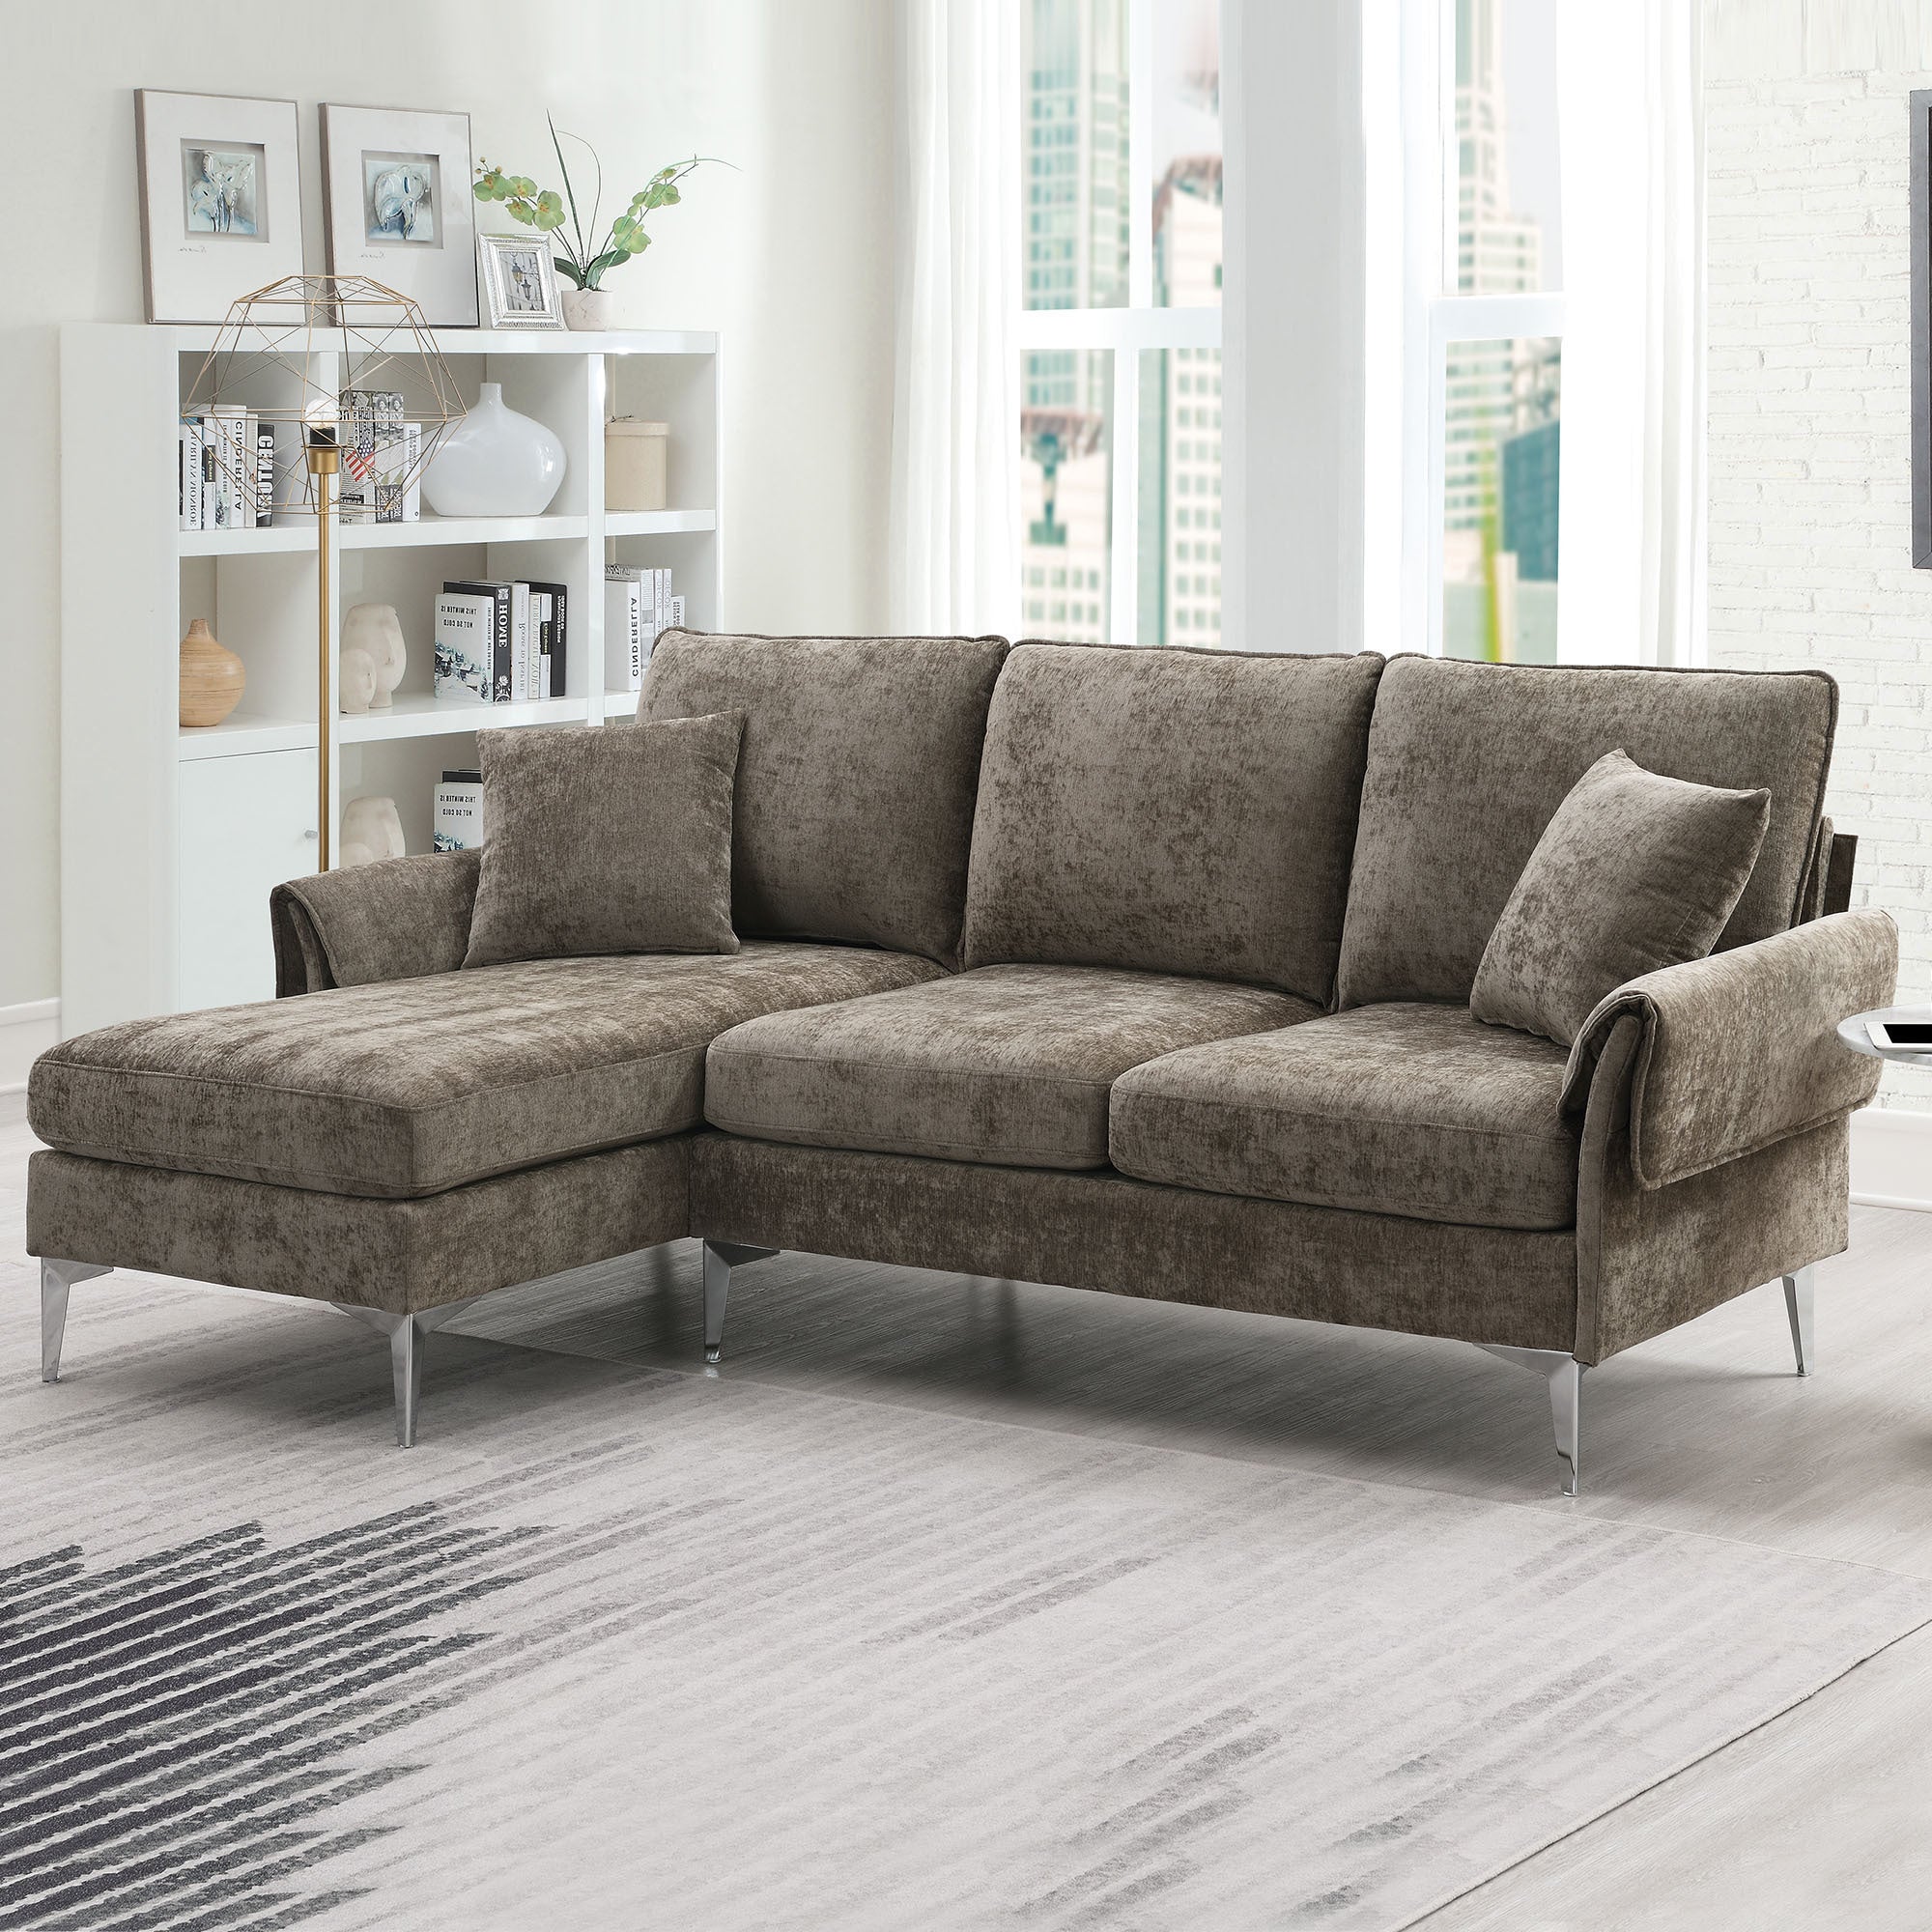 84" Convertible Sectional Sofa, Modern Chenille L-Shaped Sofa Couch with Reversible Chaise Lounge